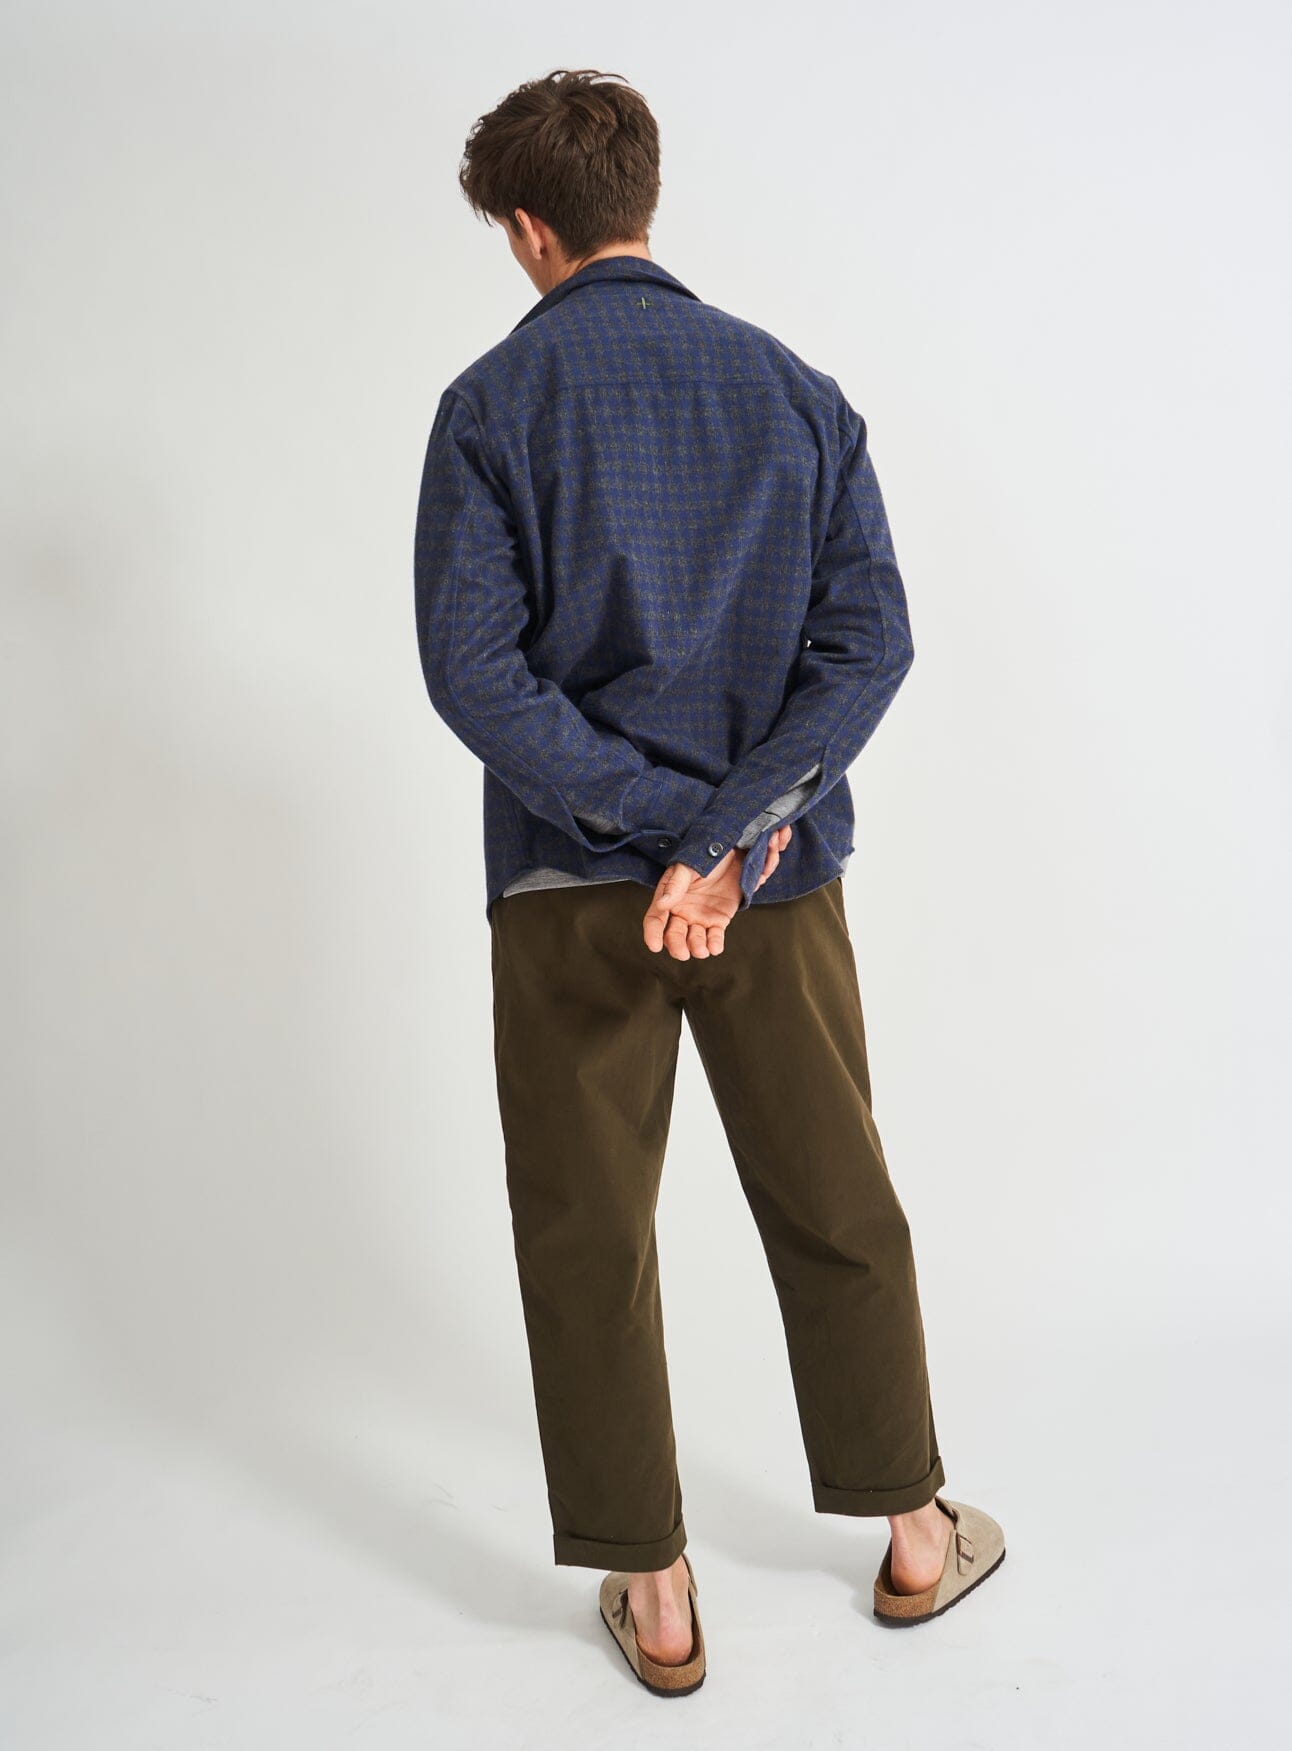 Mens flannel shirt, sustainable clothing